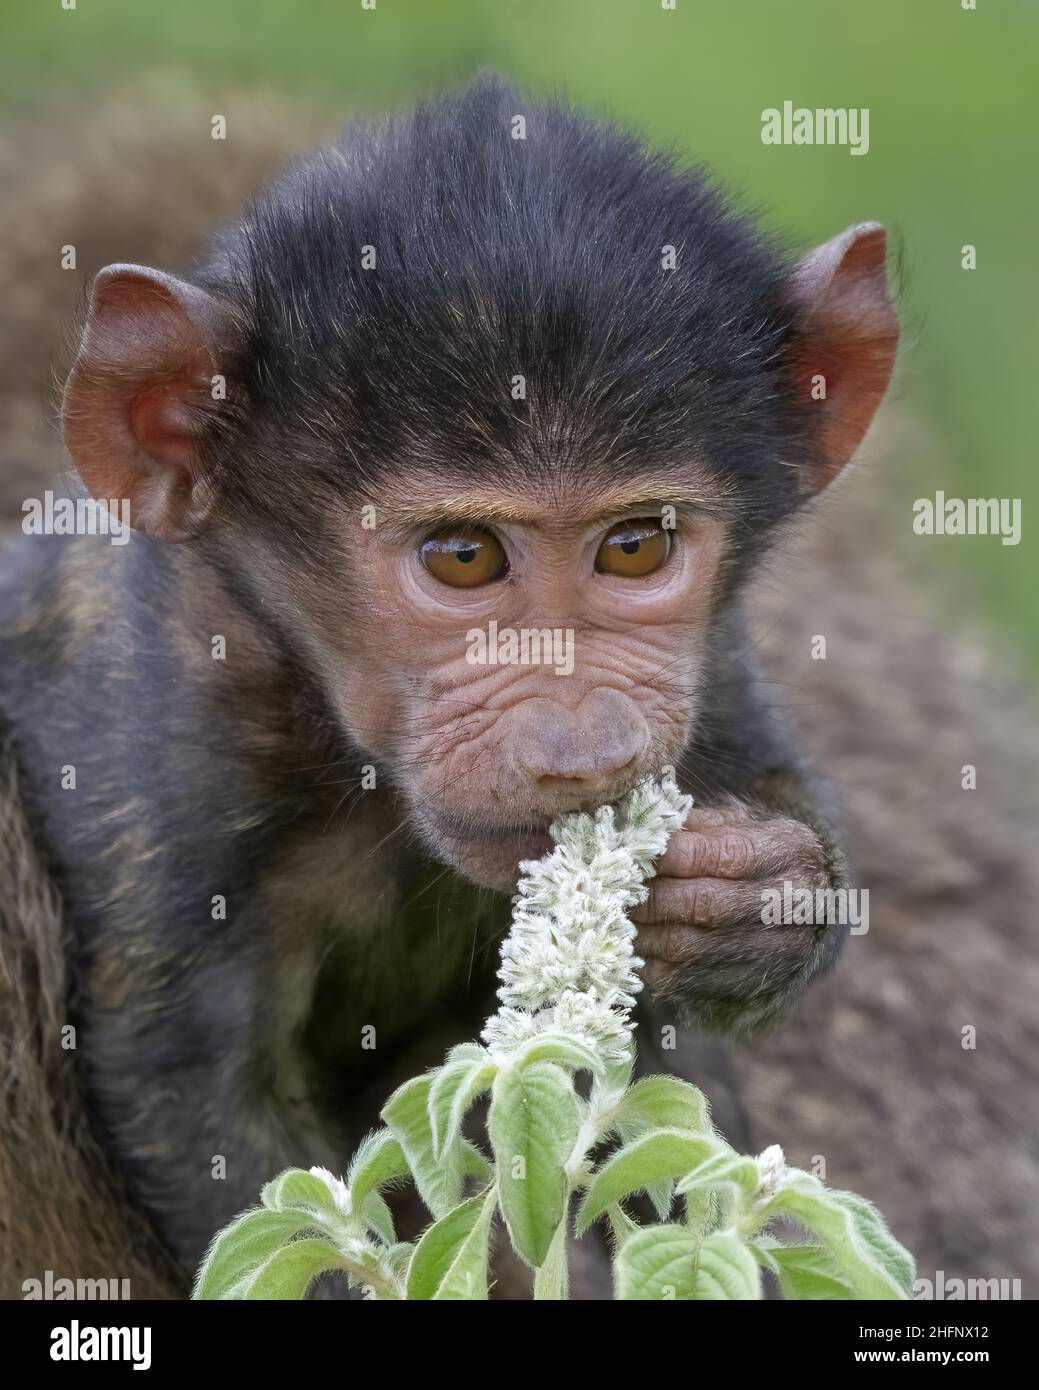 Baby olive baboon (Papio anubis) tasting a flower in the Ngorongoro Crater, Tanzania, Africa Stock Photo